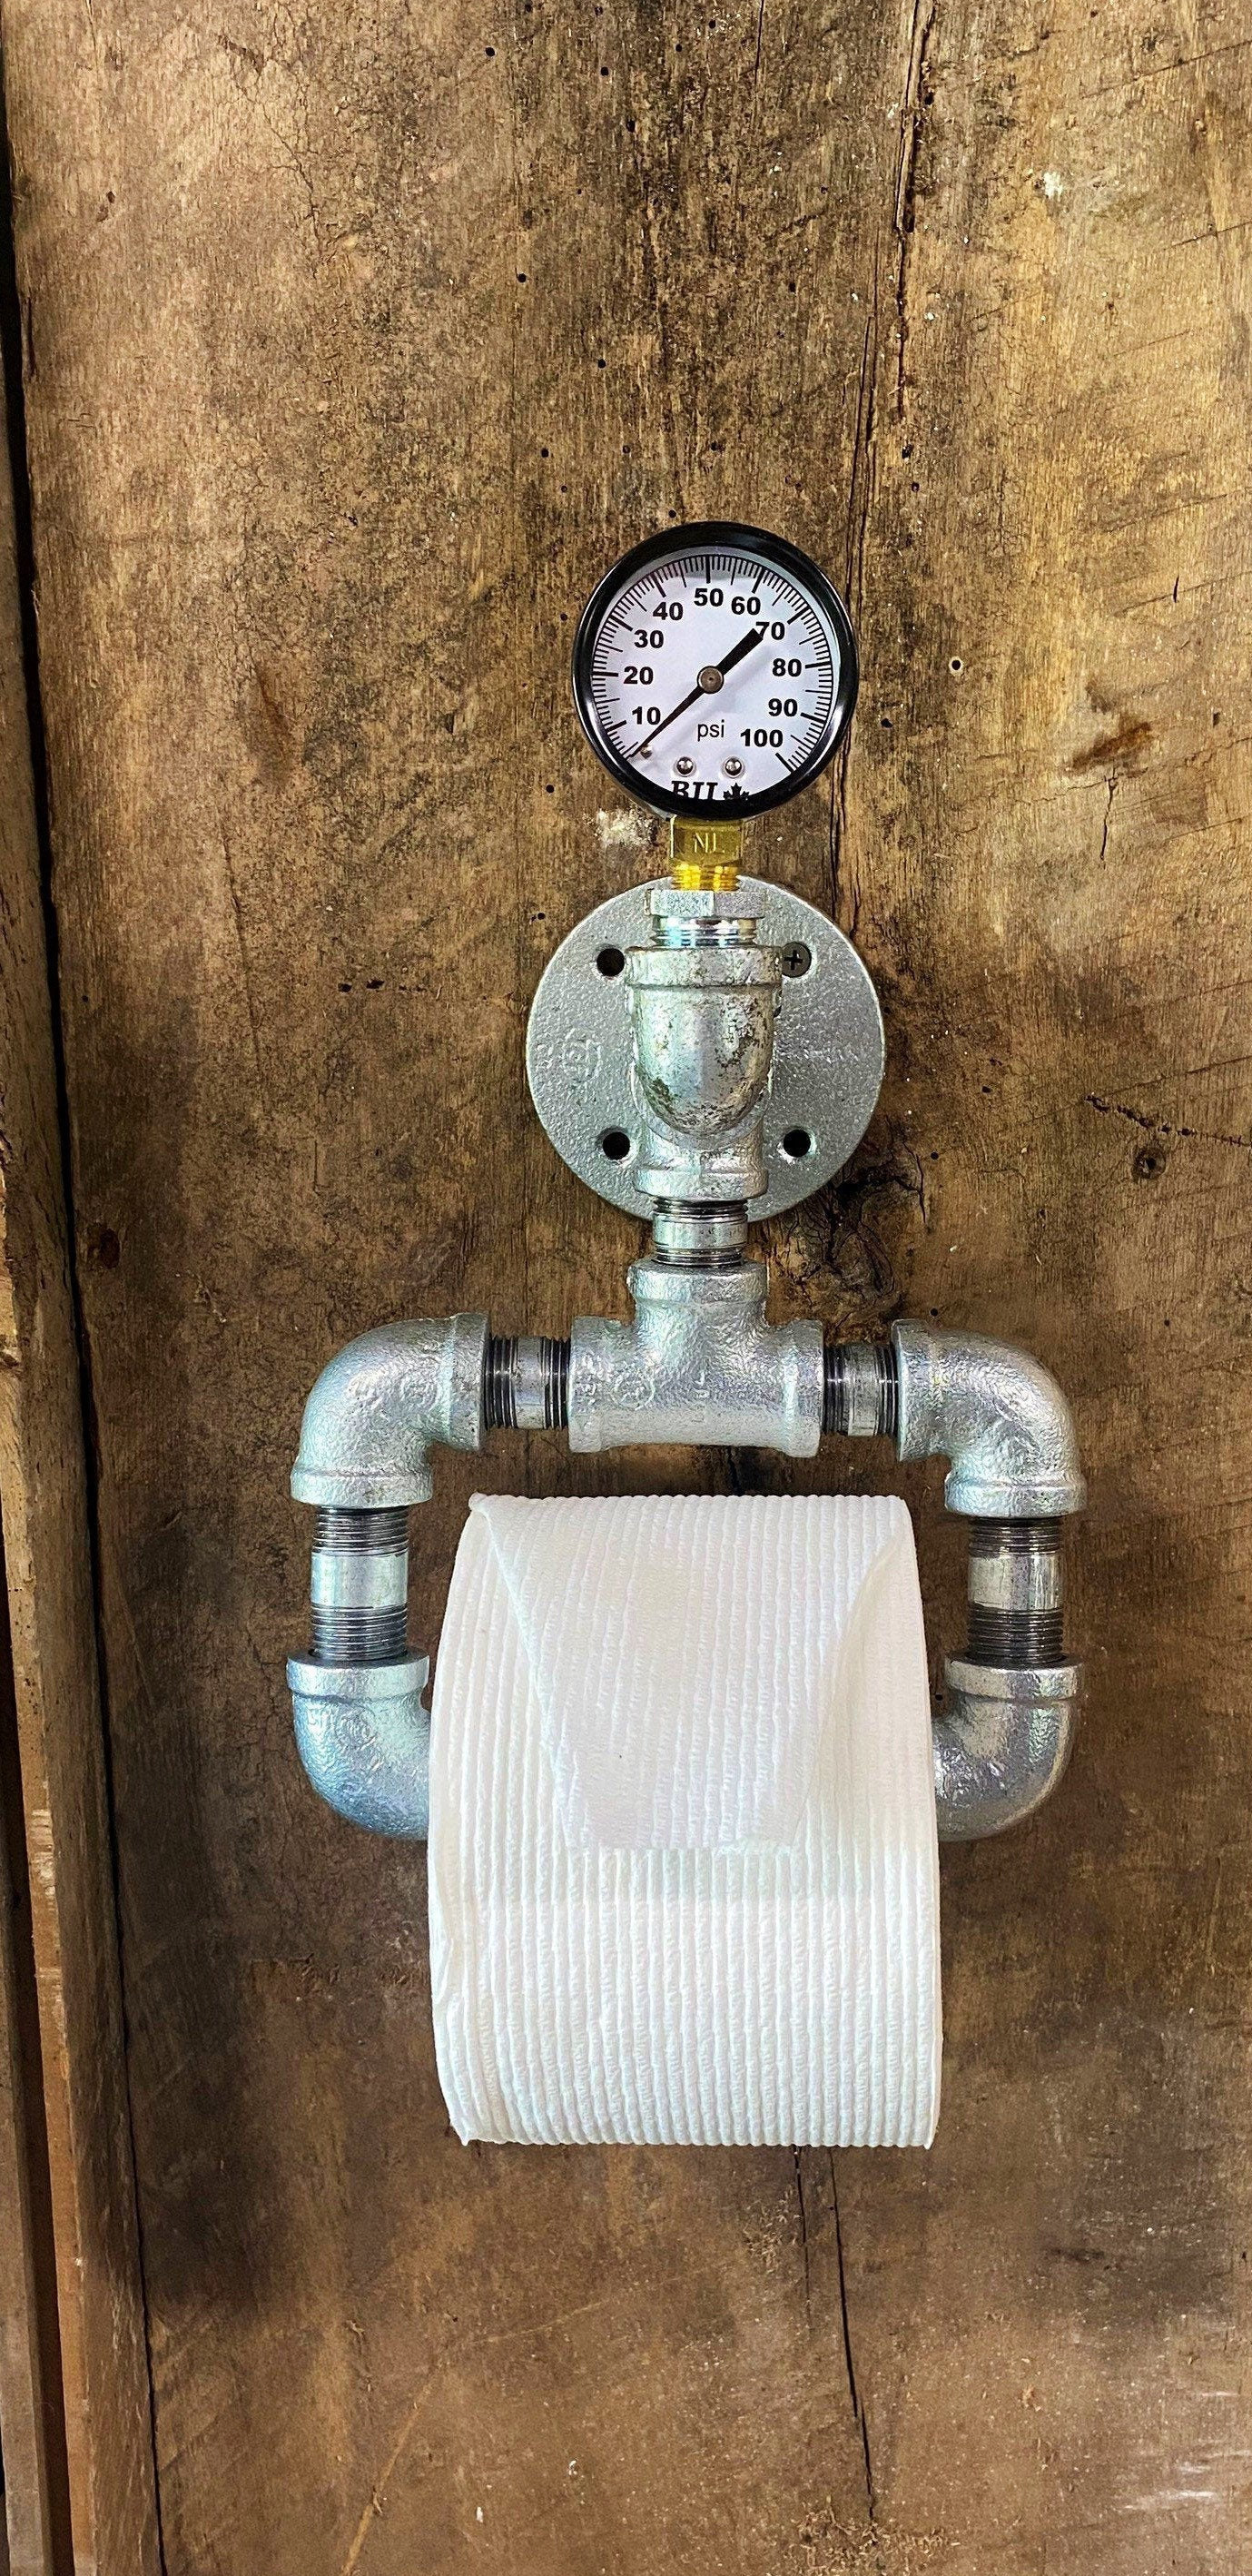 Industrial Toilet paper-holder-Bathroom Toilet paper holder-Barn Door  Handle-Pipe Holder-Industrial Decor-Steampunk-Country Home Decor